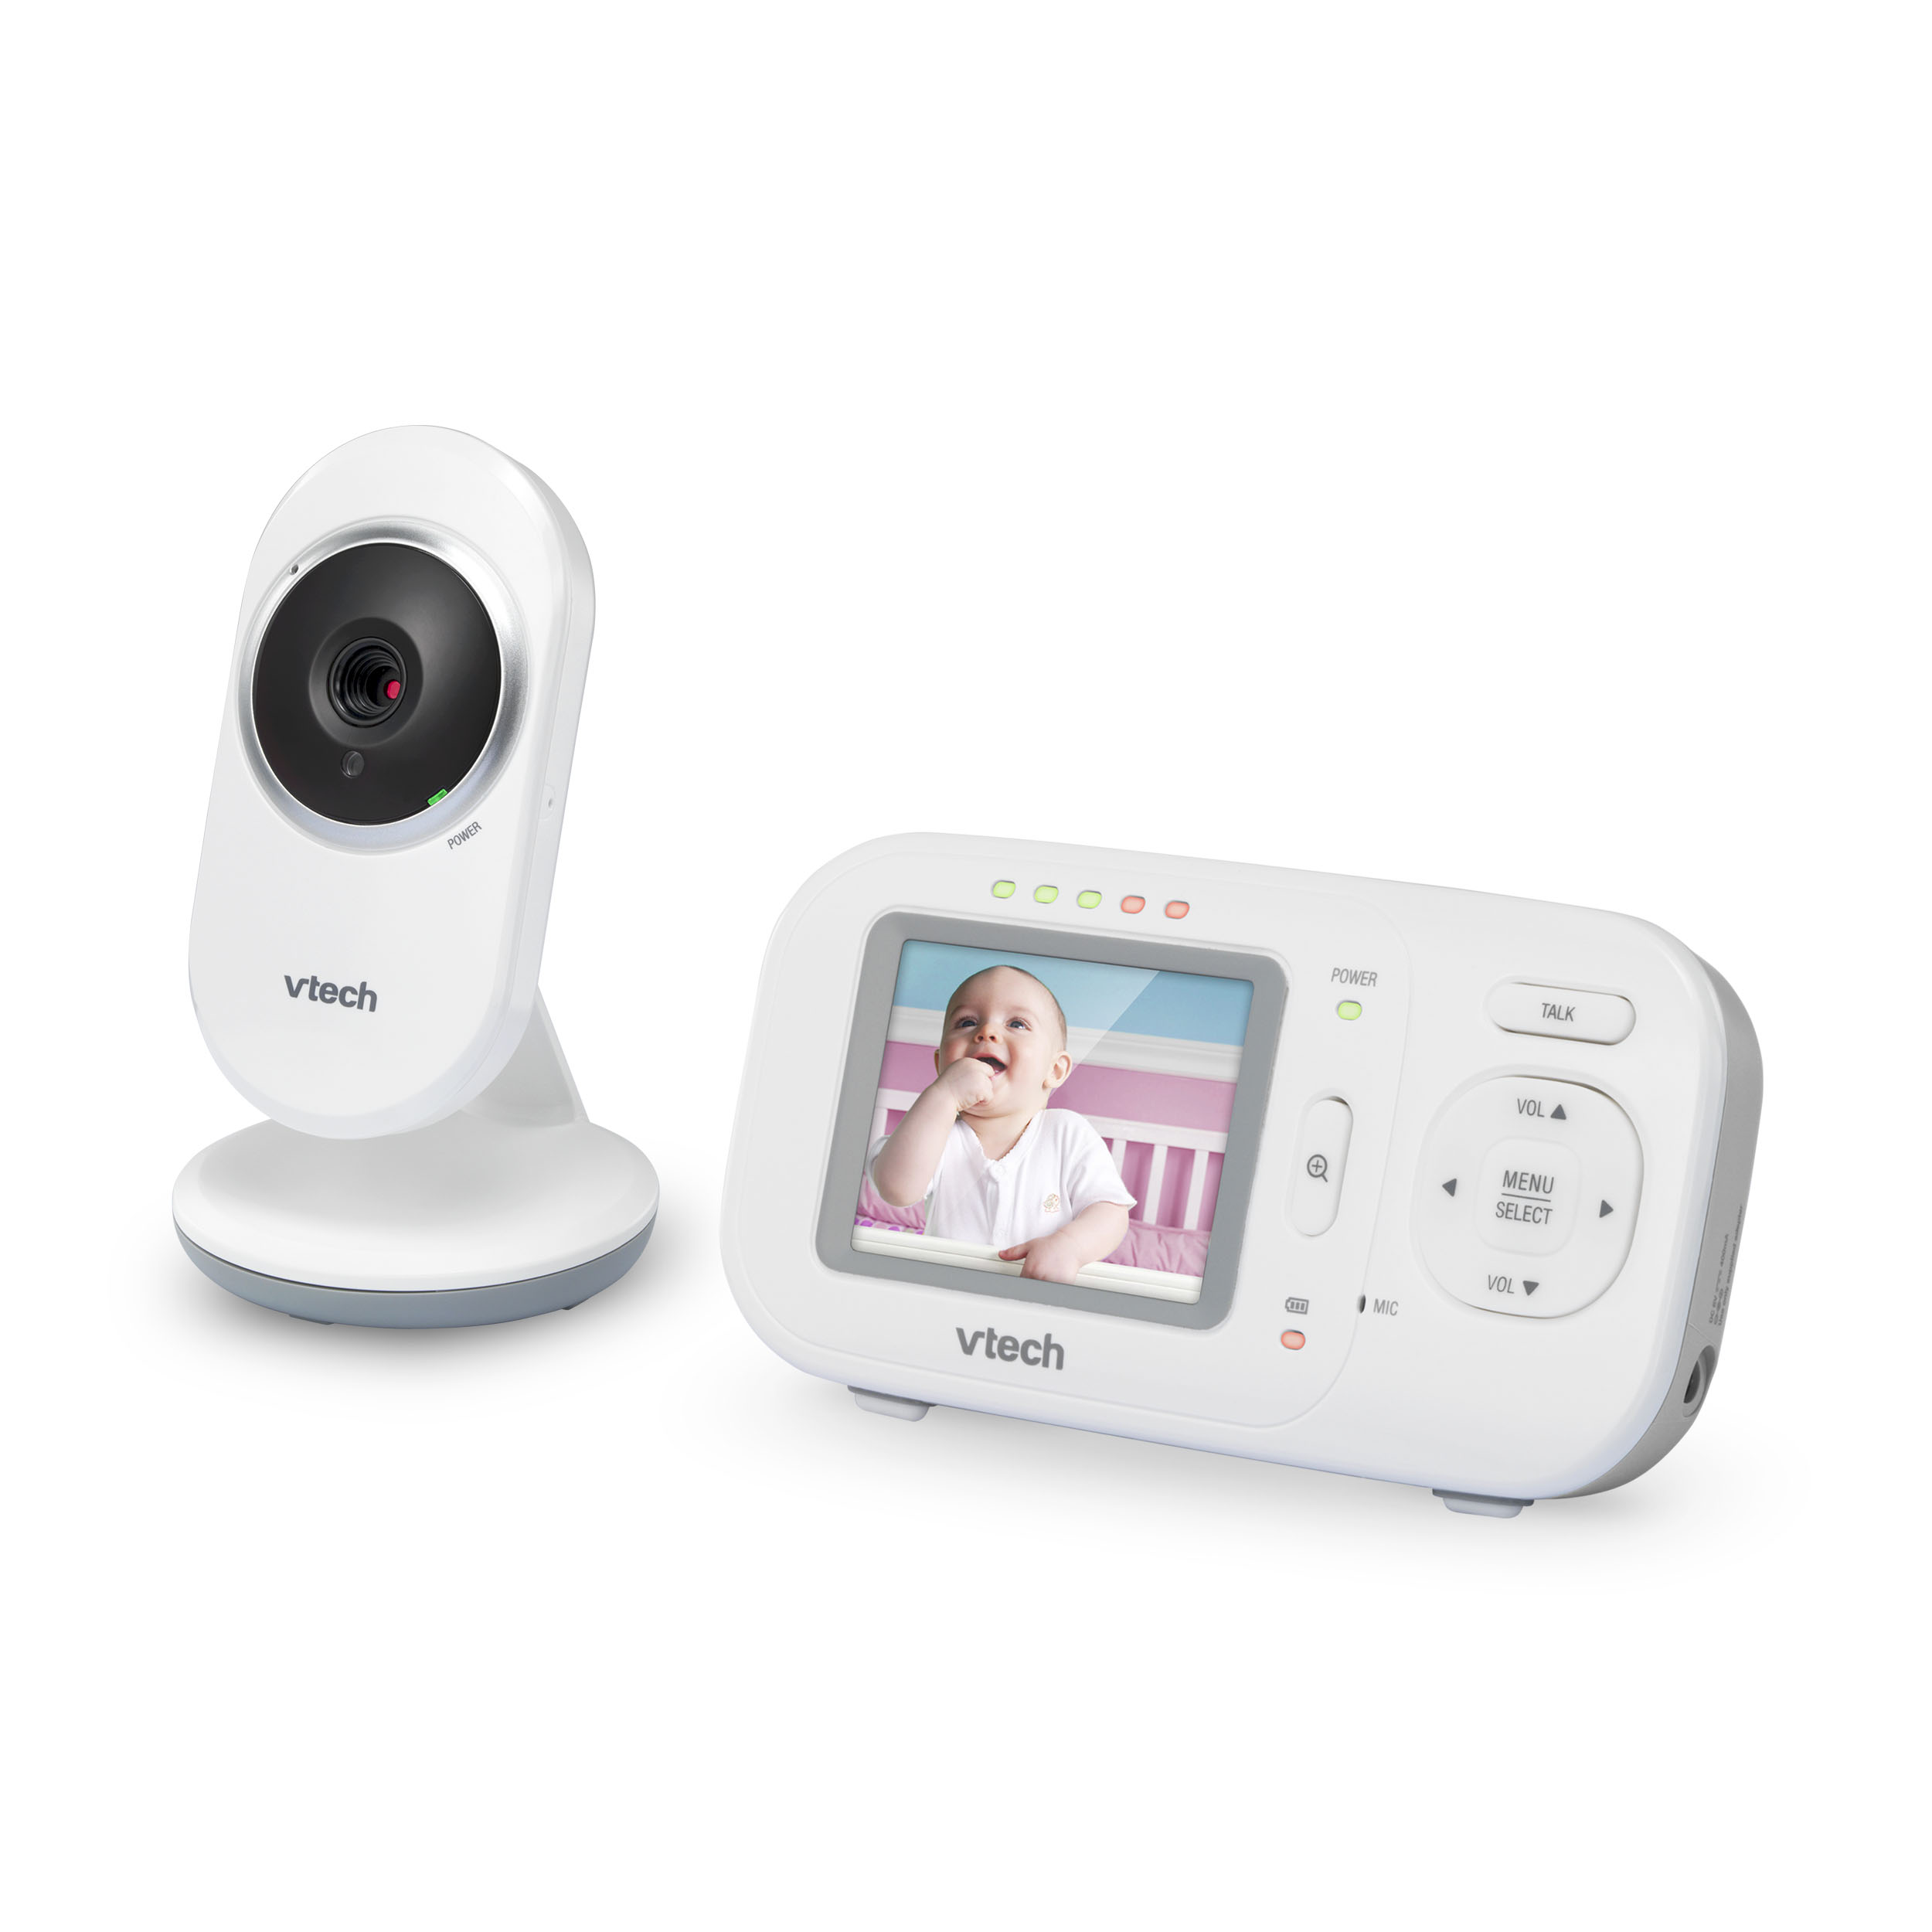 2.4" Digital Video Baby Monitor with Full-Color and Automatic Night Vision - view 1